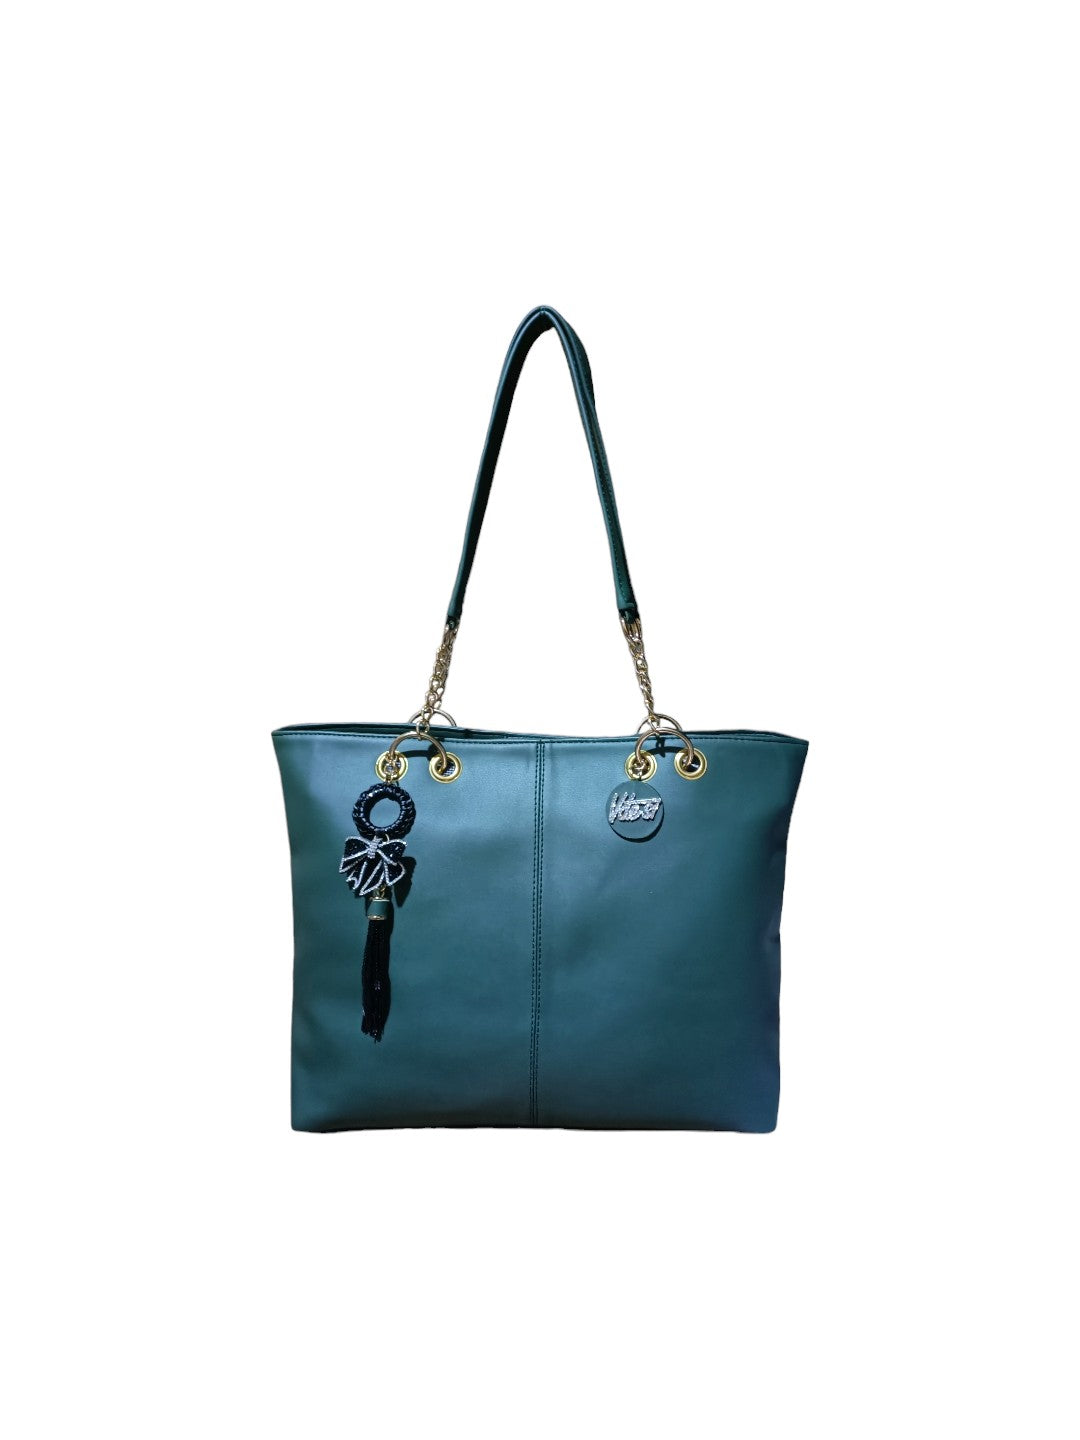 A Vdesi tote bag for ladies. 